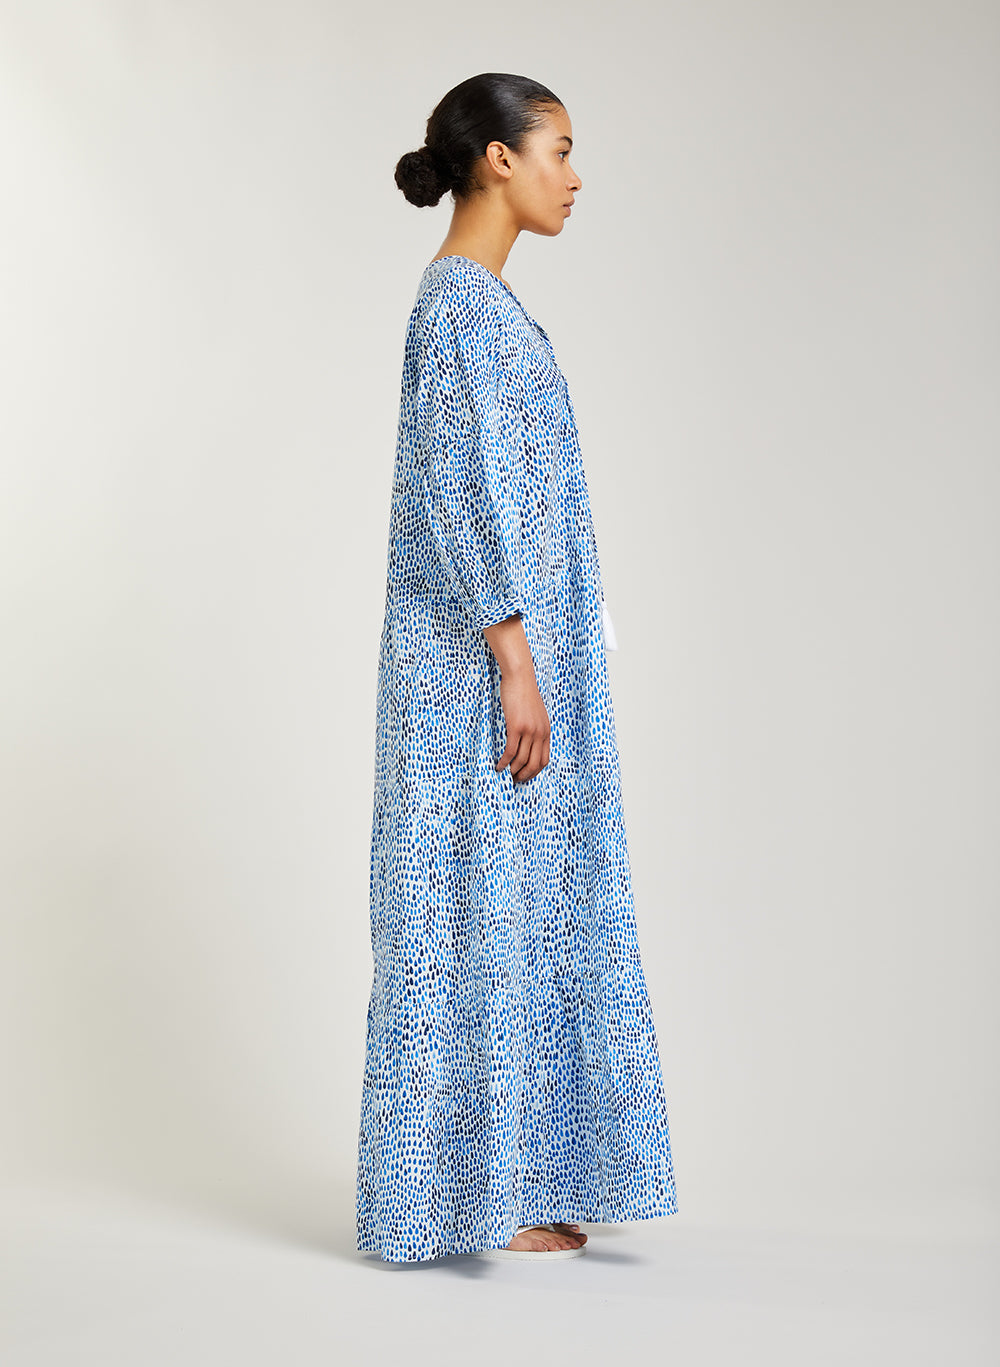 Airy maxi dress made of cotton